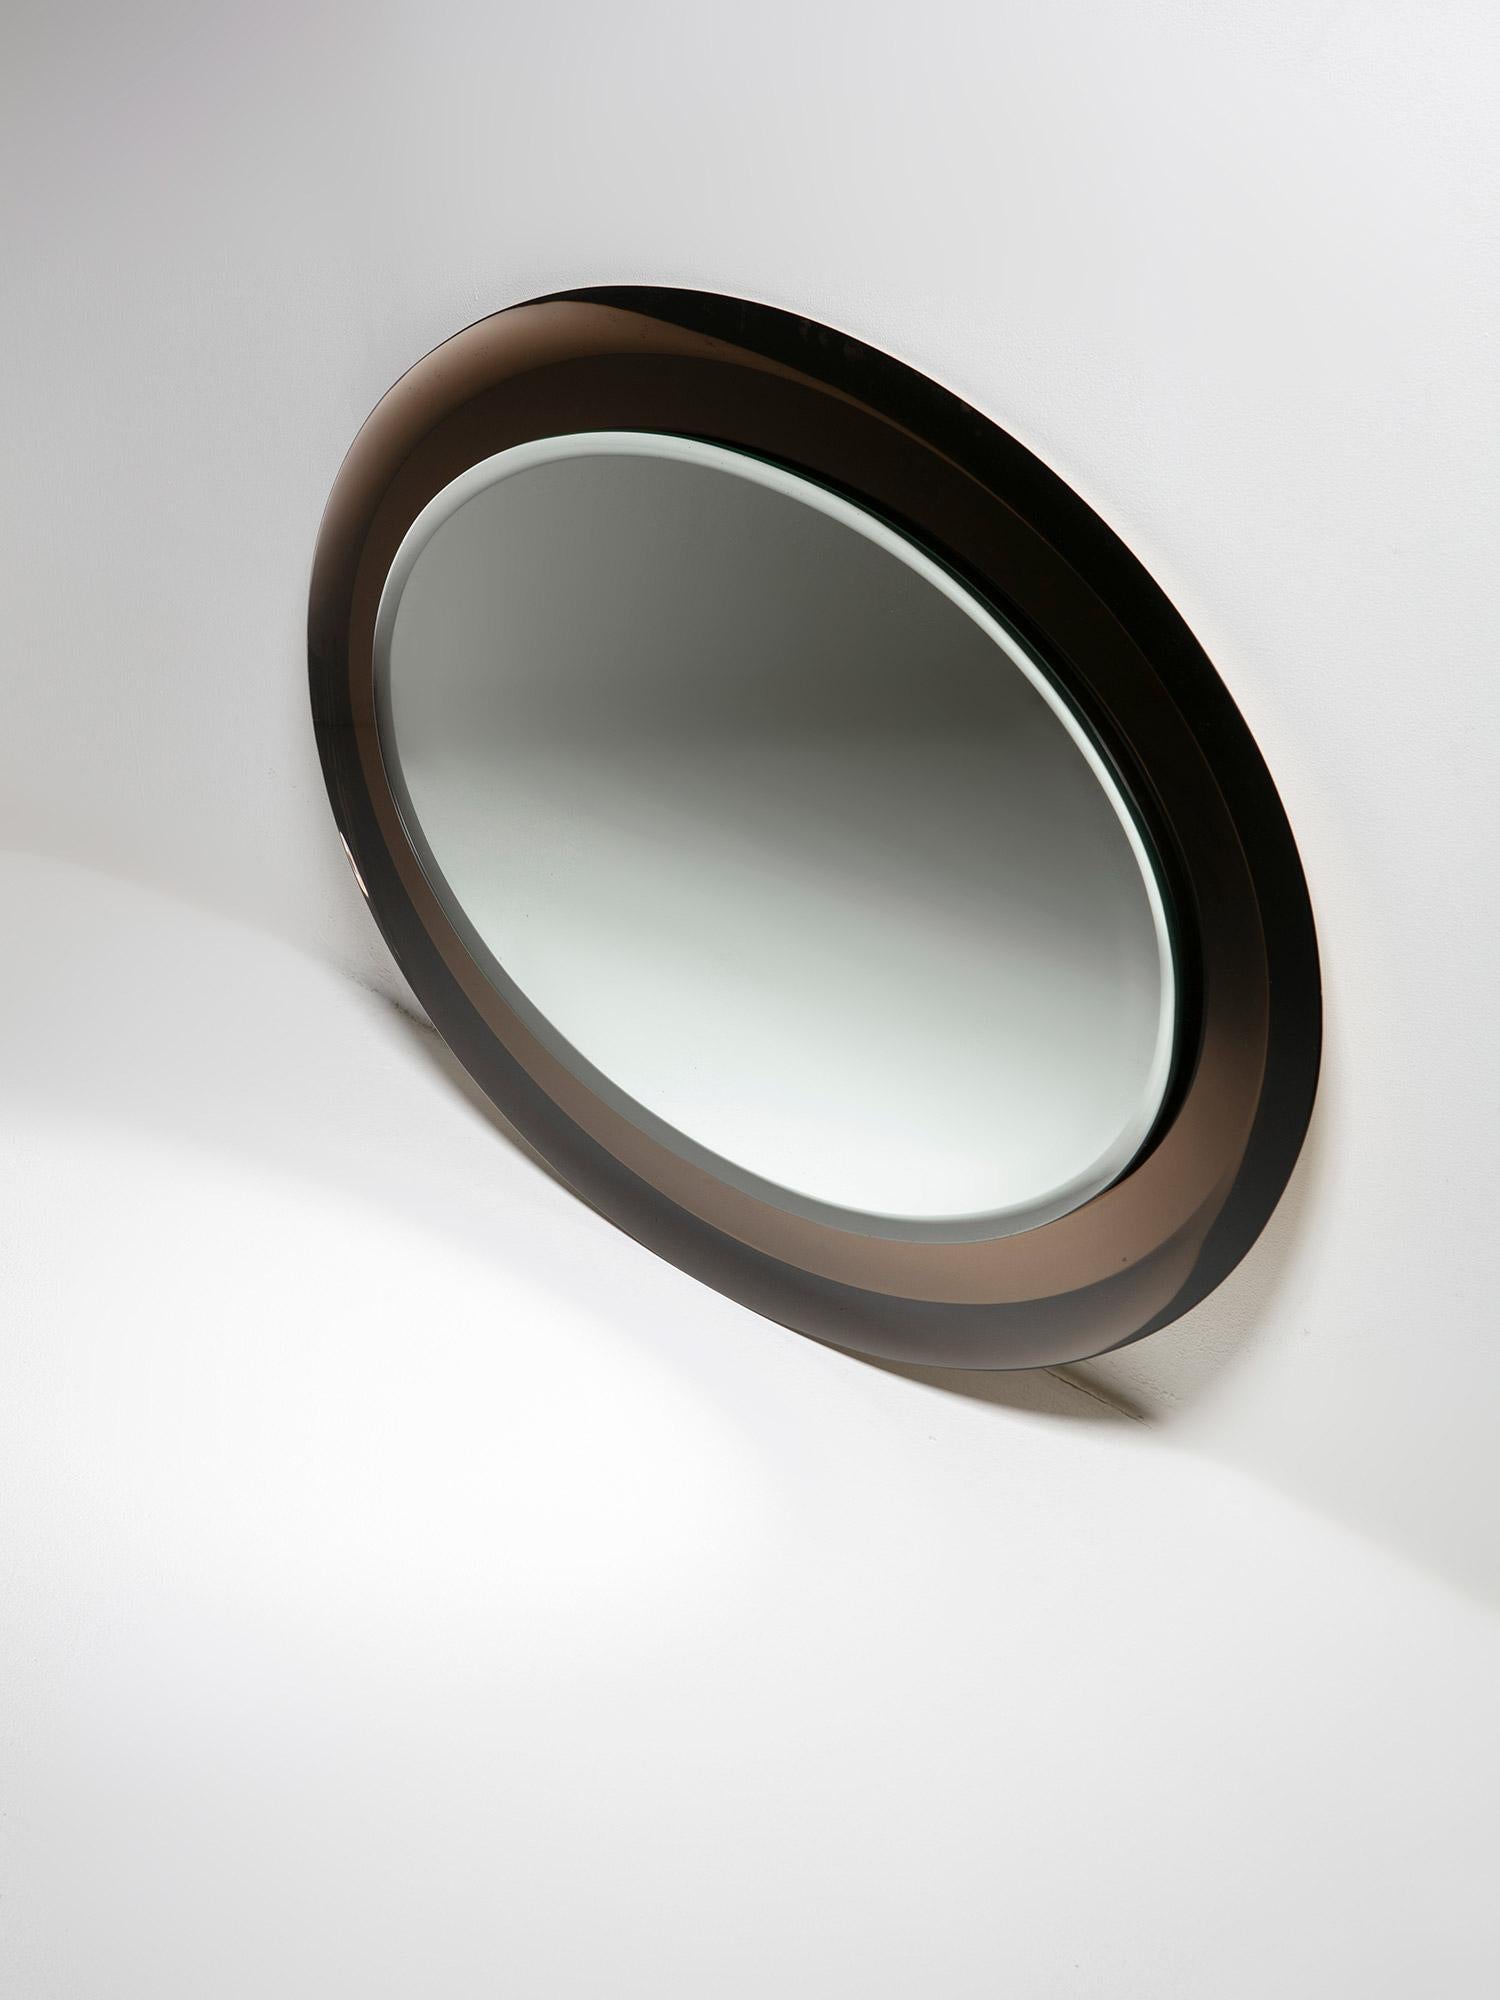 Double bevelled oval mirror by Metalvetro, Siena.
Fresh fading brown frame supporting the central piece.
Original paper label on the back